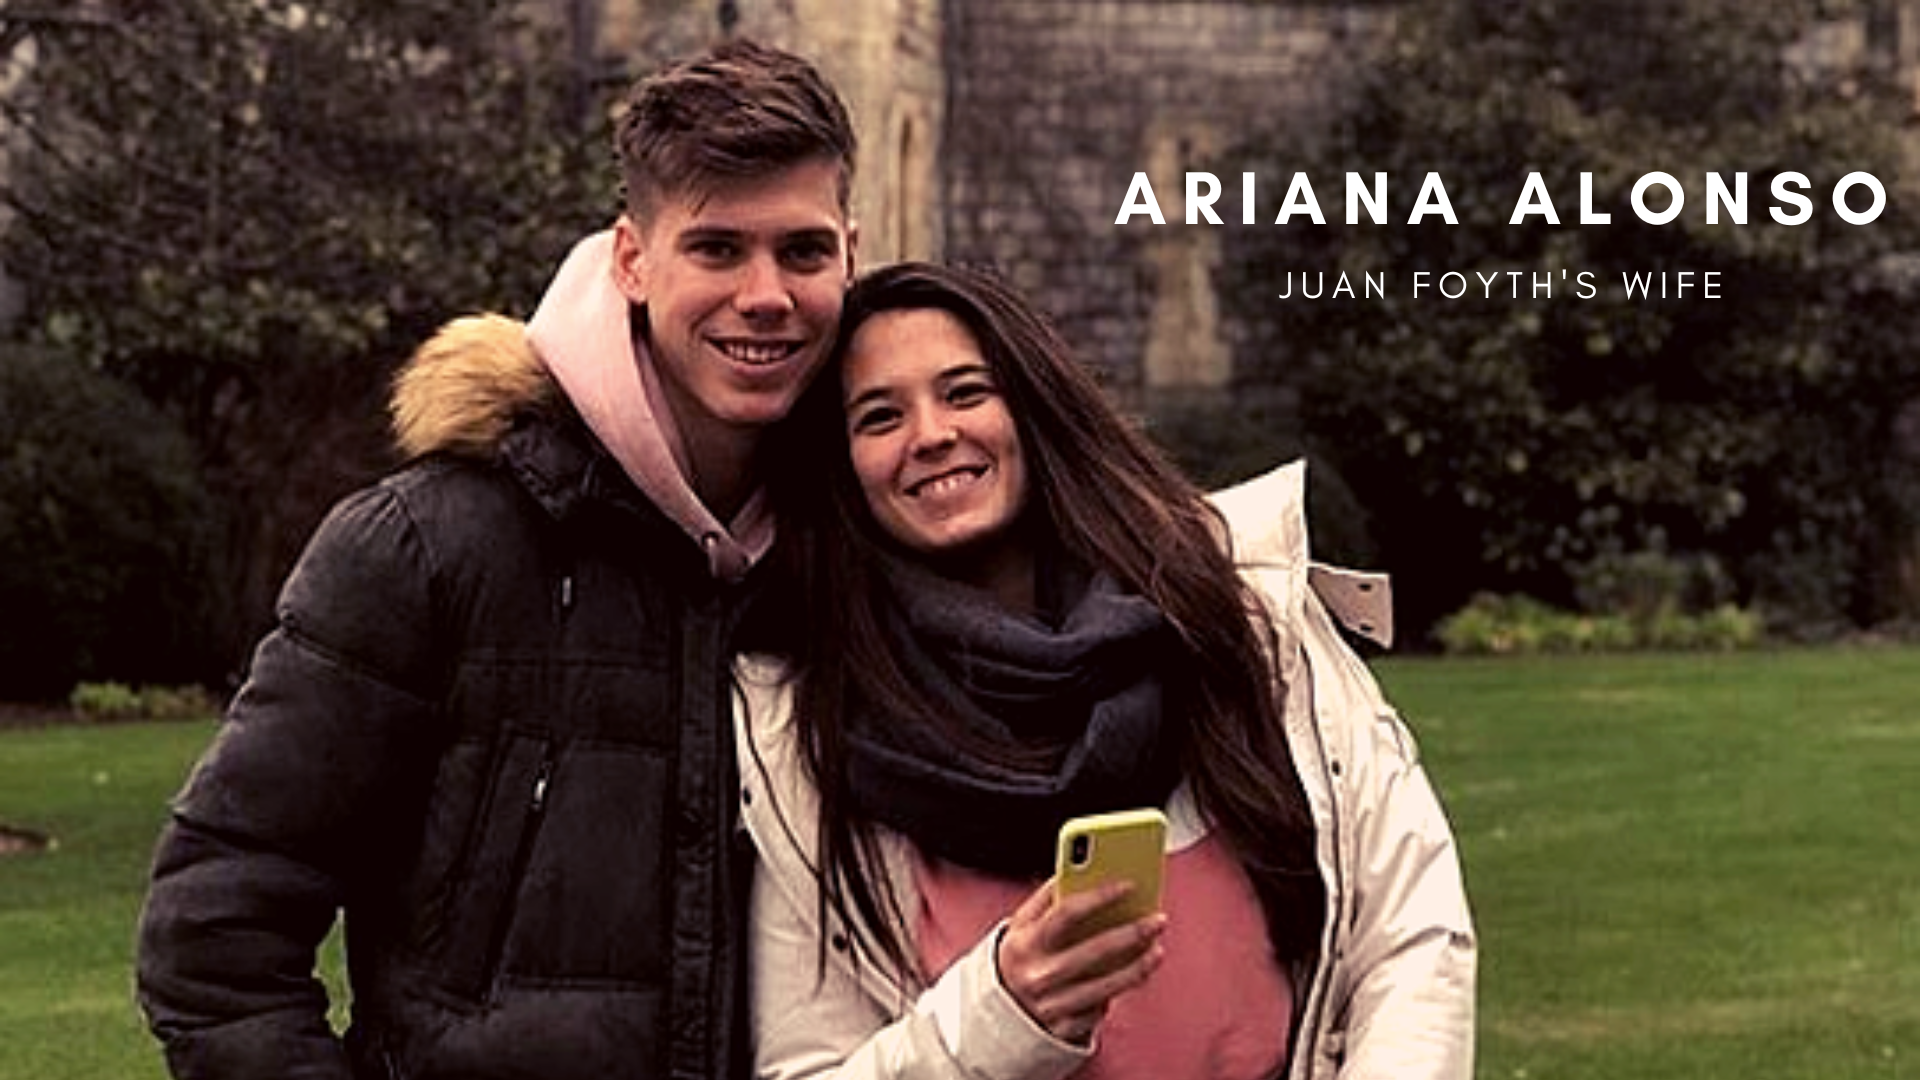 Juan Foyth with his wife Ariana Alonso. (Credit: Instagram)